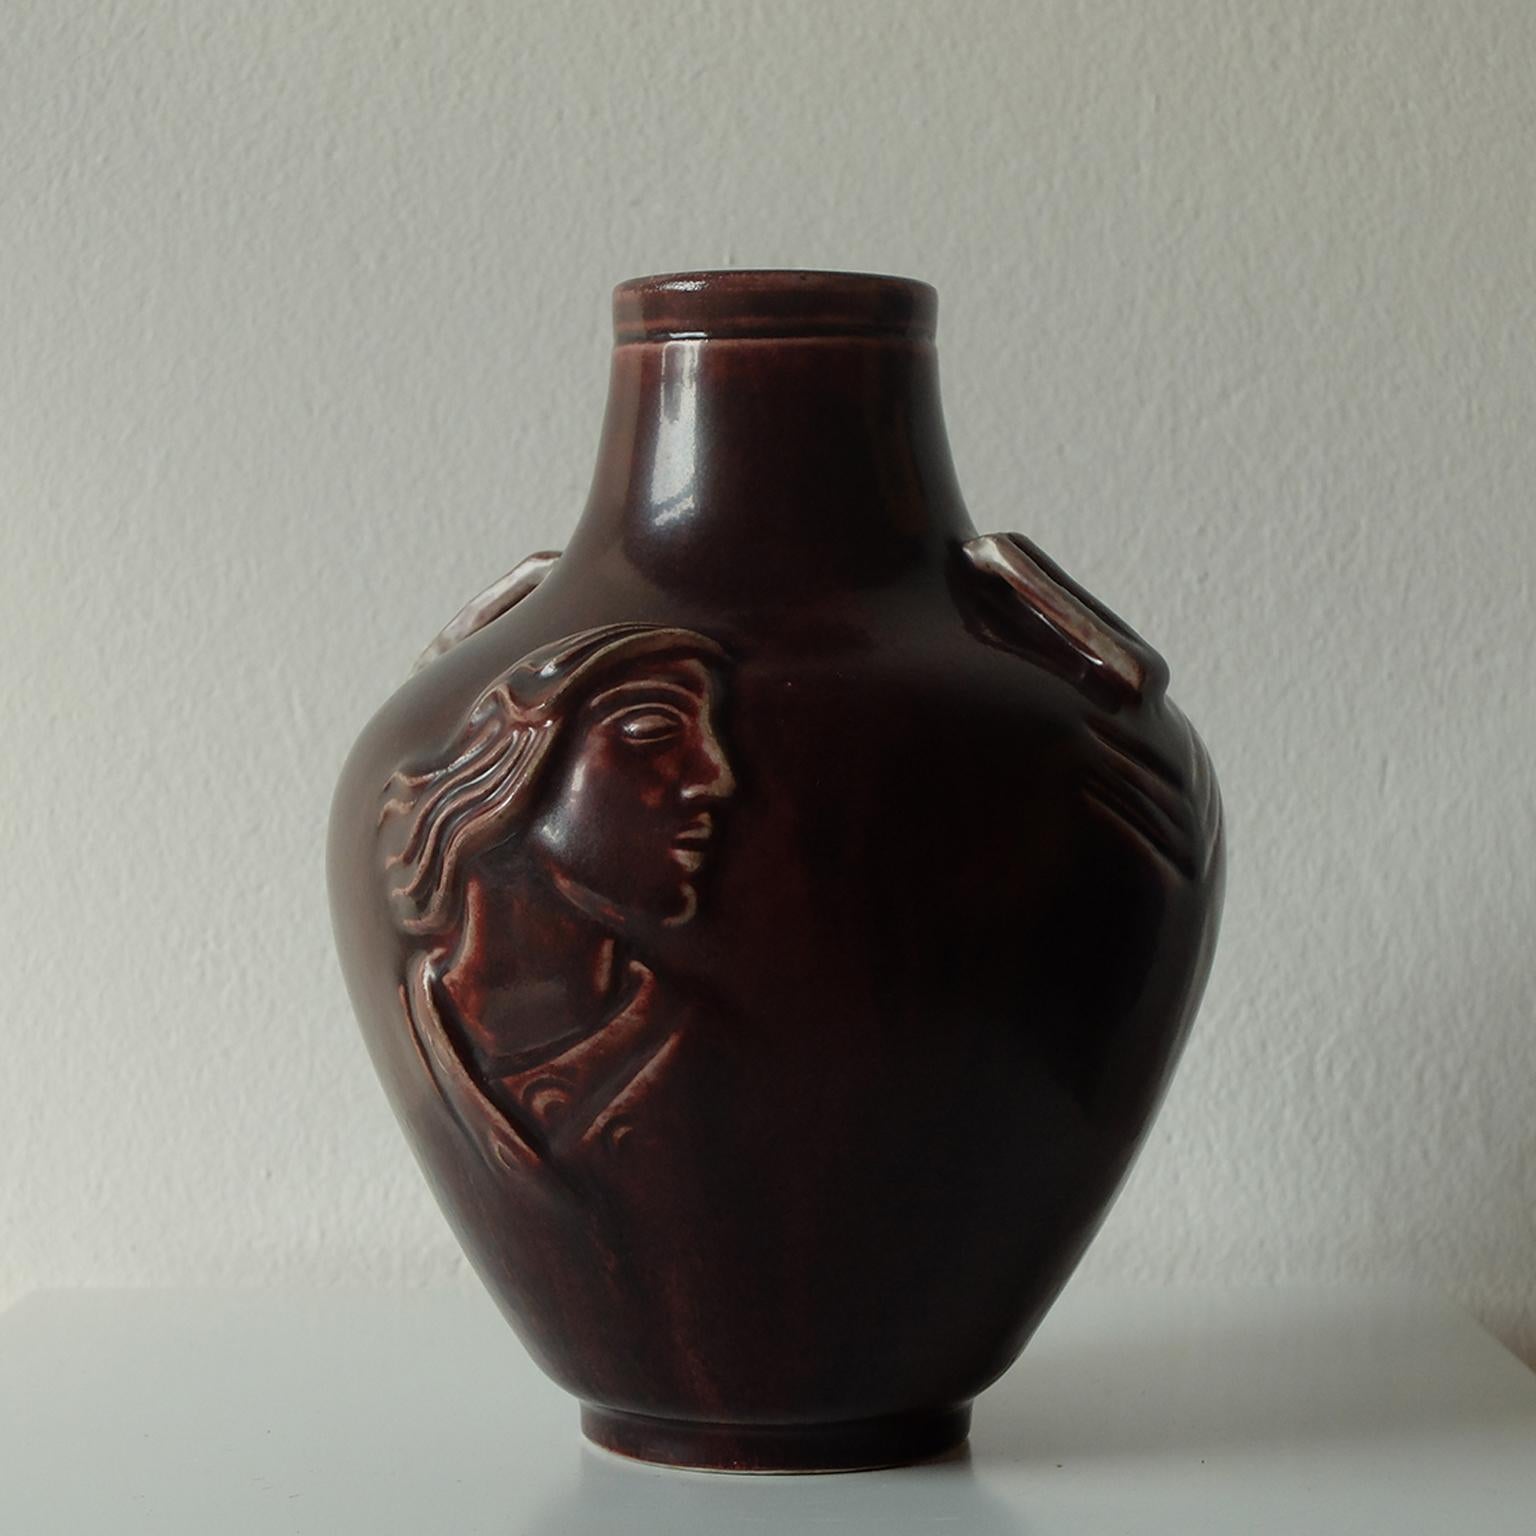 Jais Nielsen for Royal Copenhagen, ceramic vase in oxblood glaze portraying two Evangelical figures, 1930s.

This piece is a great example of Classical Scandinavian and Mid-Century Danish Pottery, showcasing a perfectly preserved deep-glazed surface